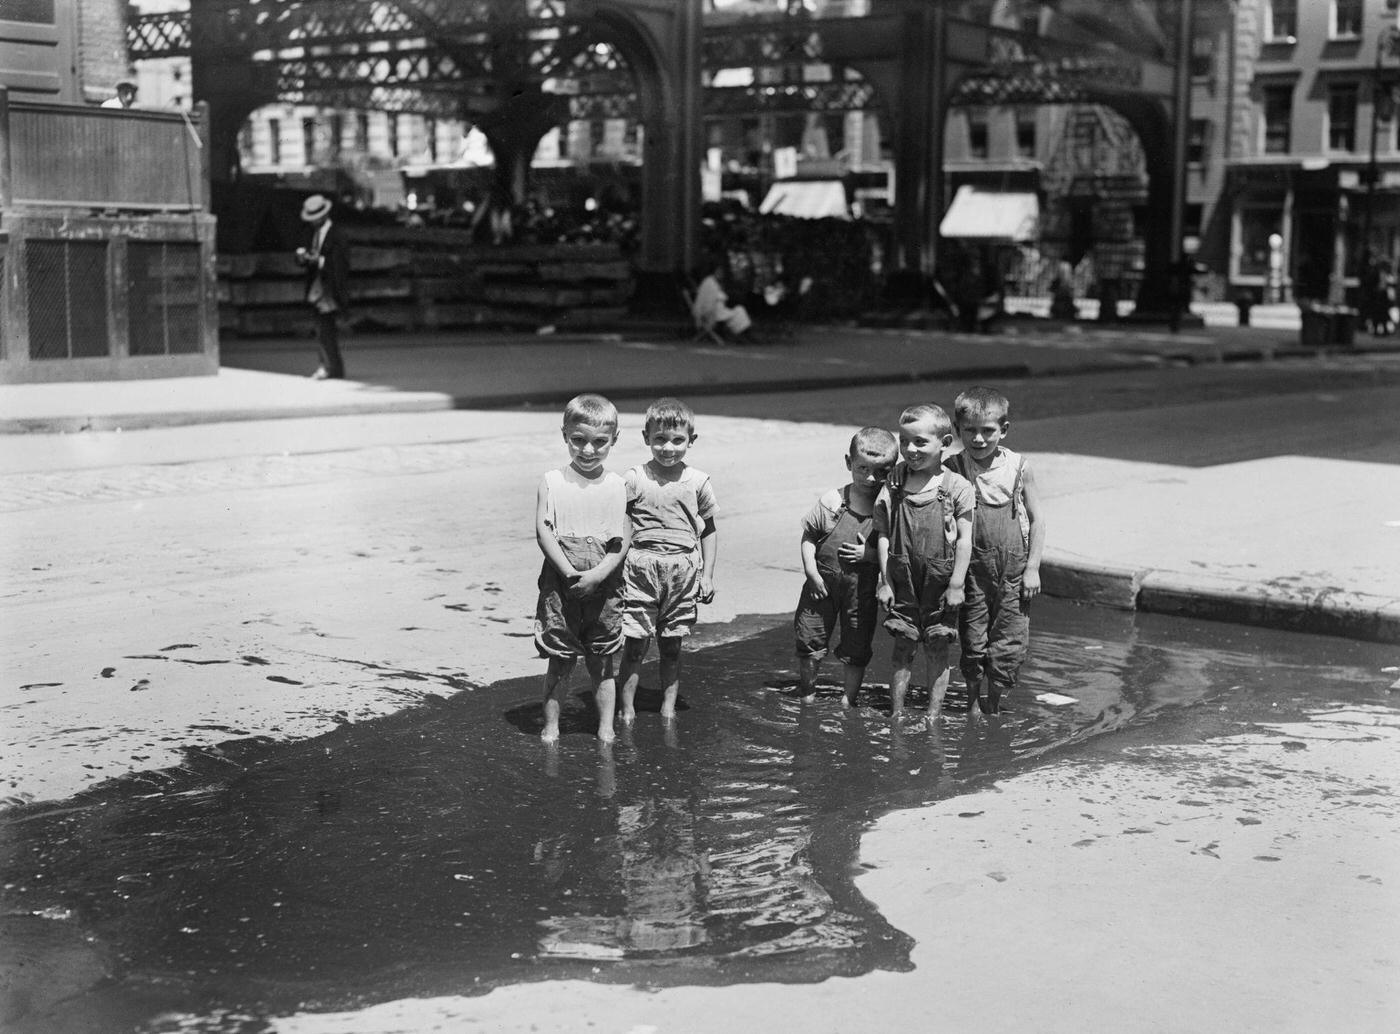 Group Of Small Boys Standing In Street Puddle, New York City, July 1913